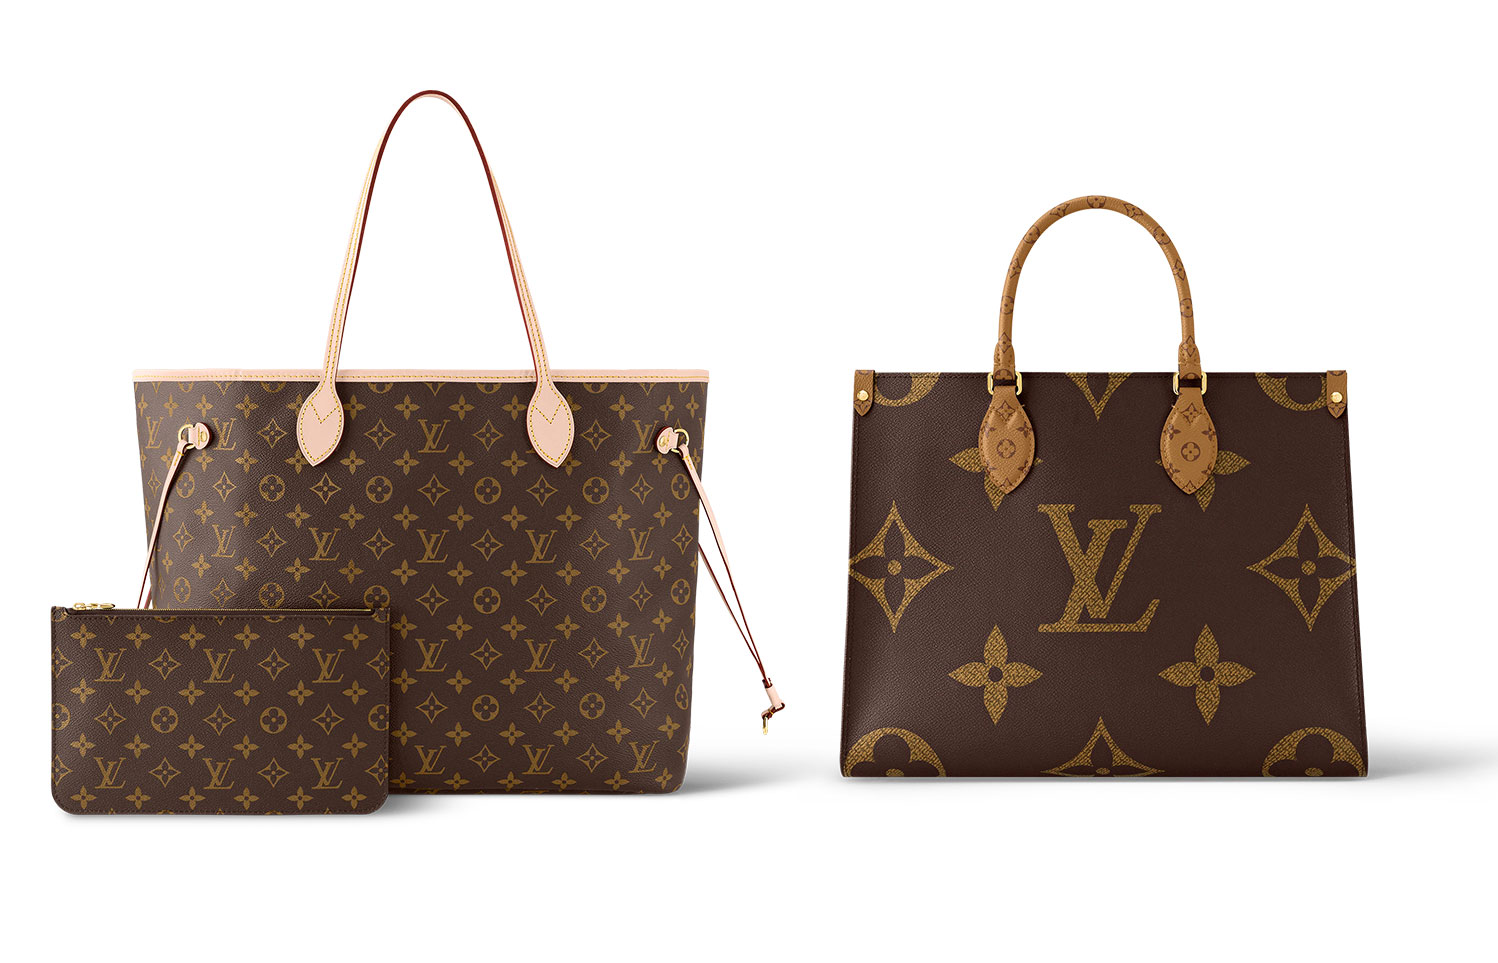 Don't Get Duped: How to Spot a Fake Louis Vuitton Bag - D&D Luxury